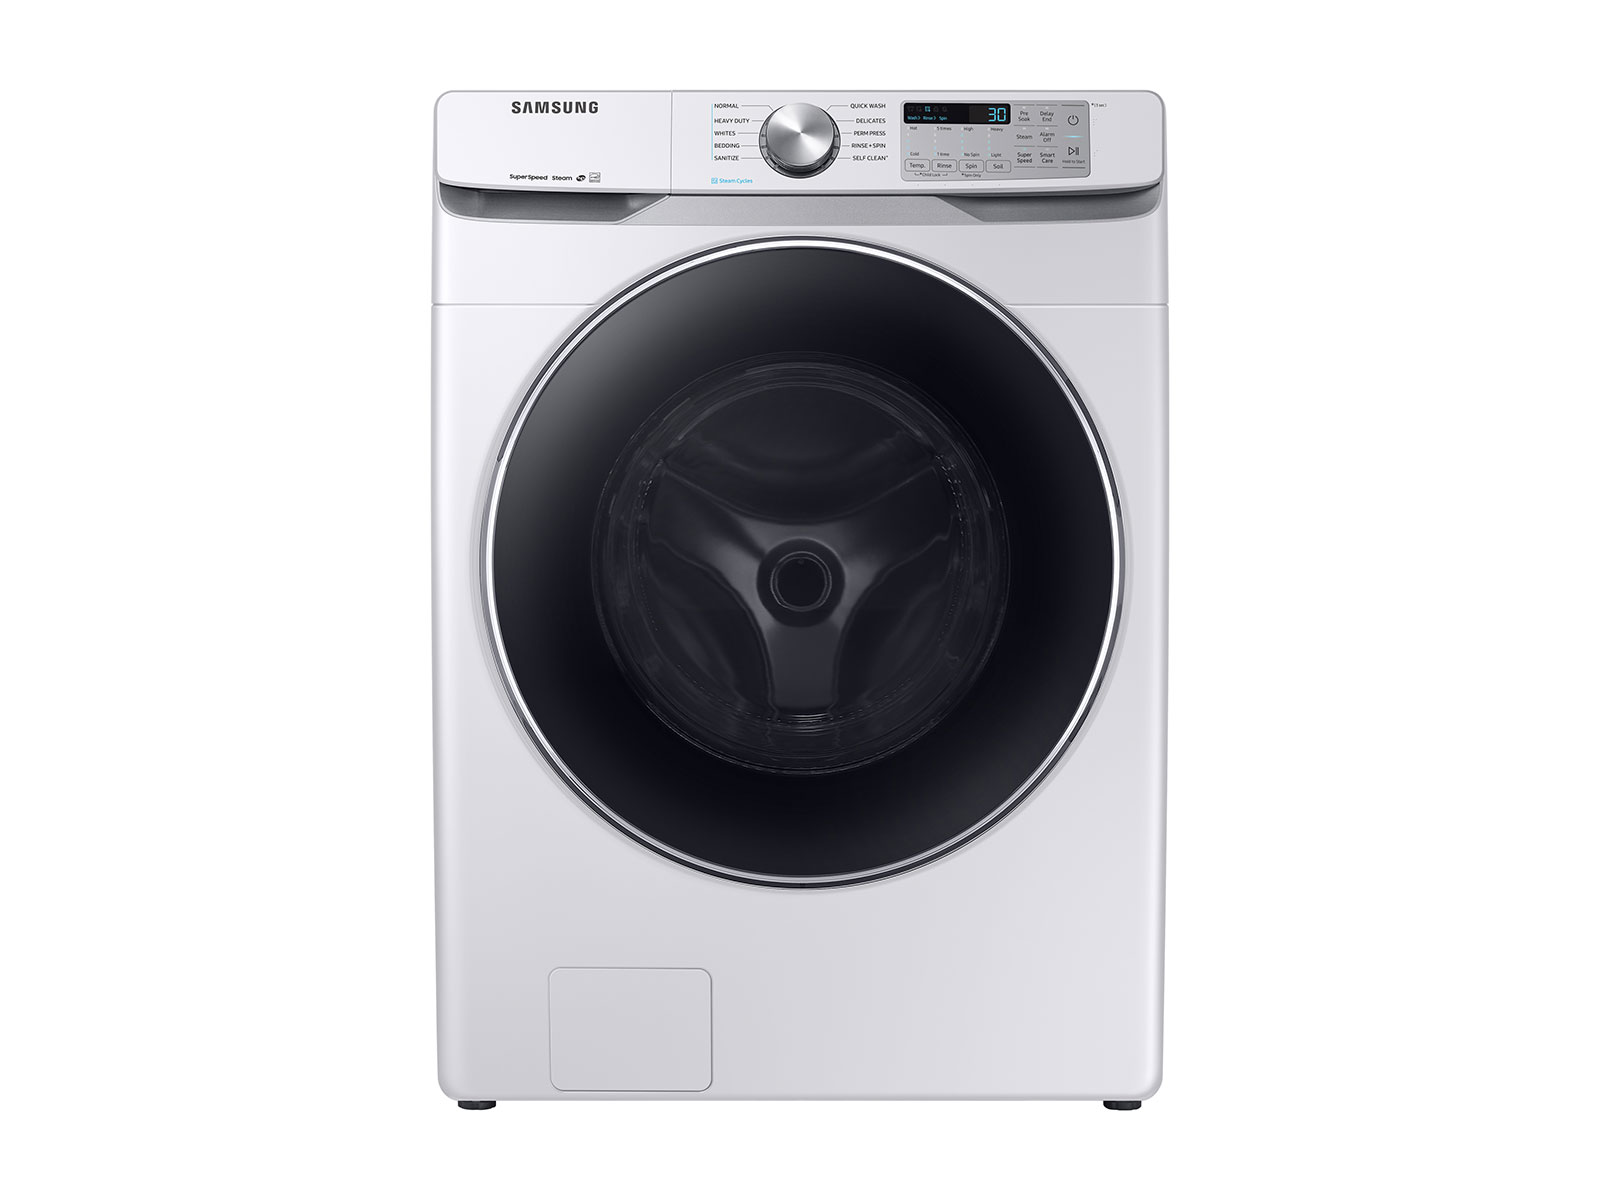 Photos - Washing Machine Samsung 4.5 cu. ft. Front Load Washer with Super Speed in White(WF45T6200A 